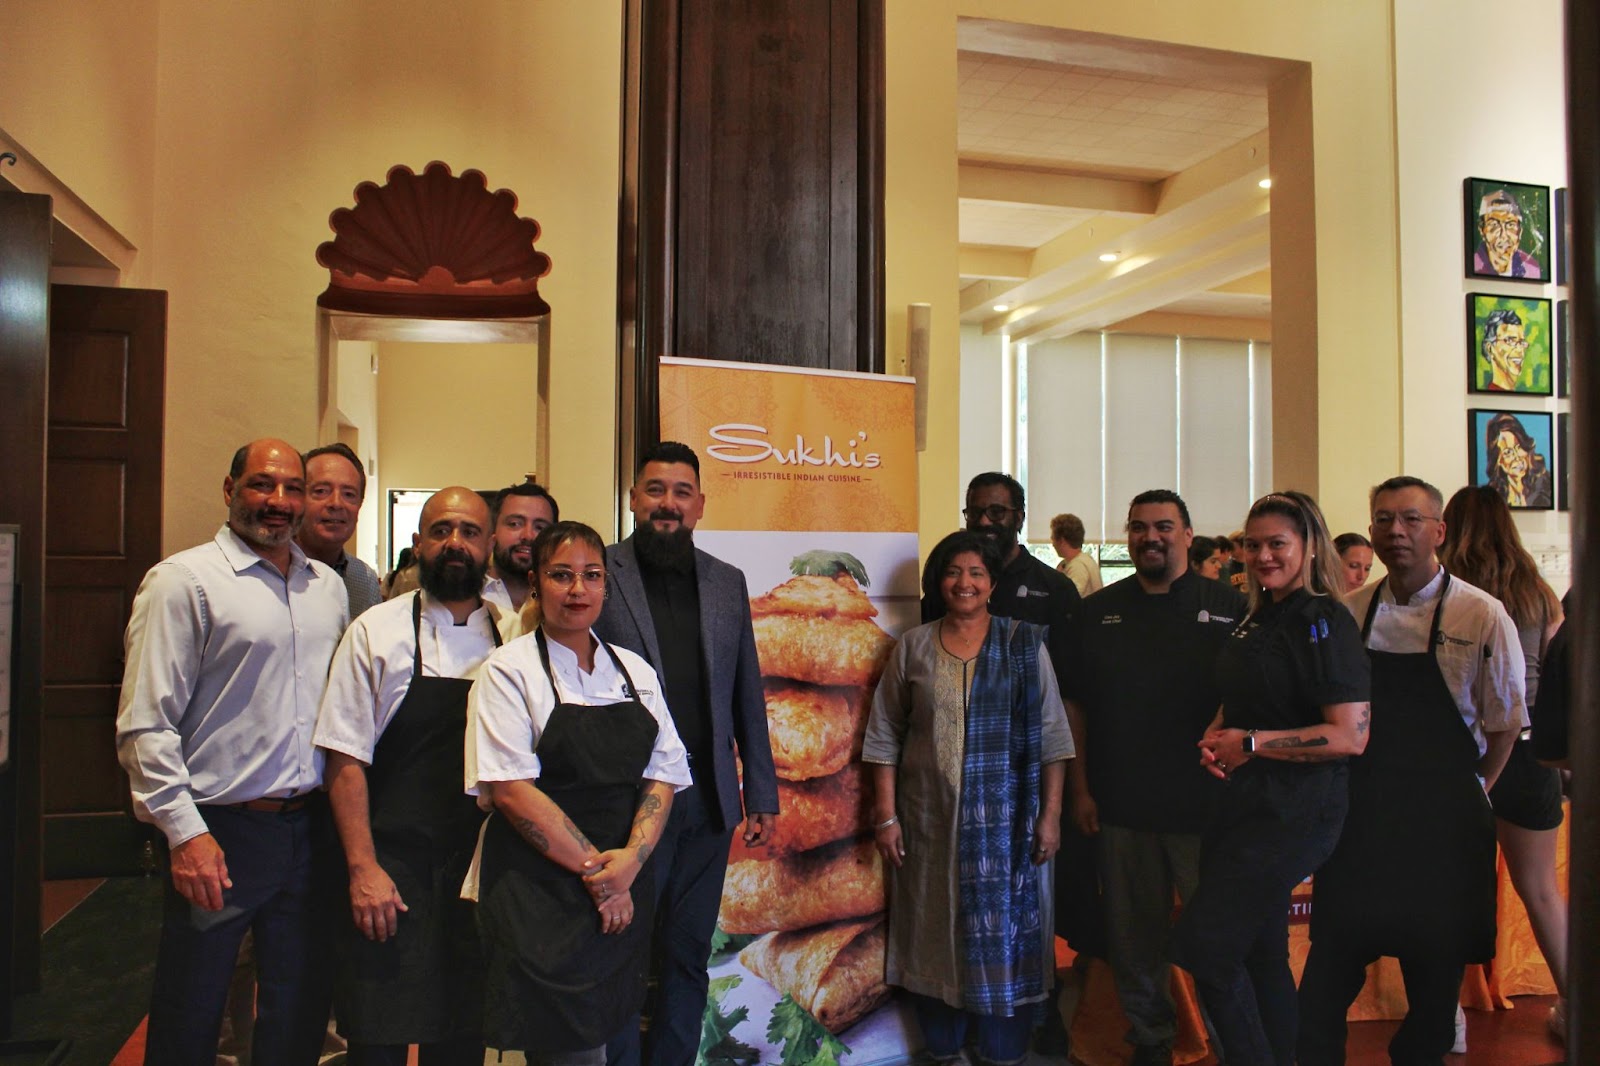 The chef team at International House, Sanjog and Chef Abbie pose for a photograph next to the Sukhi’s banner.